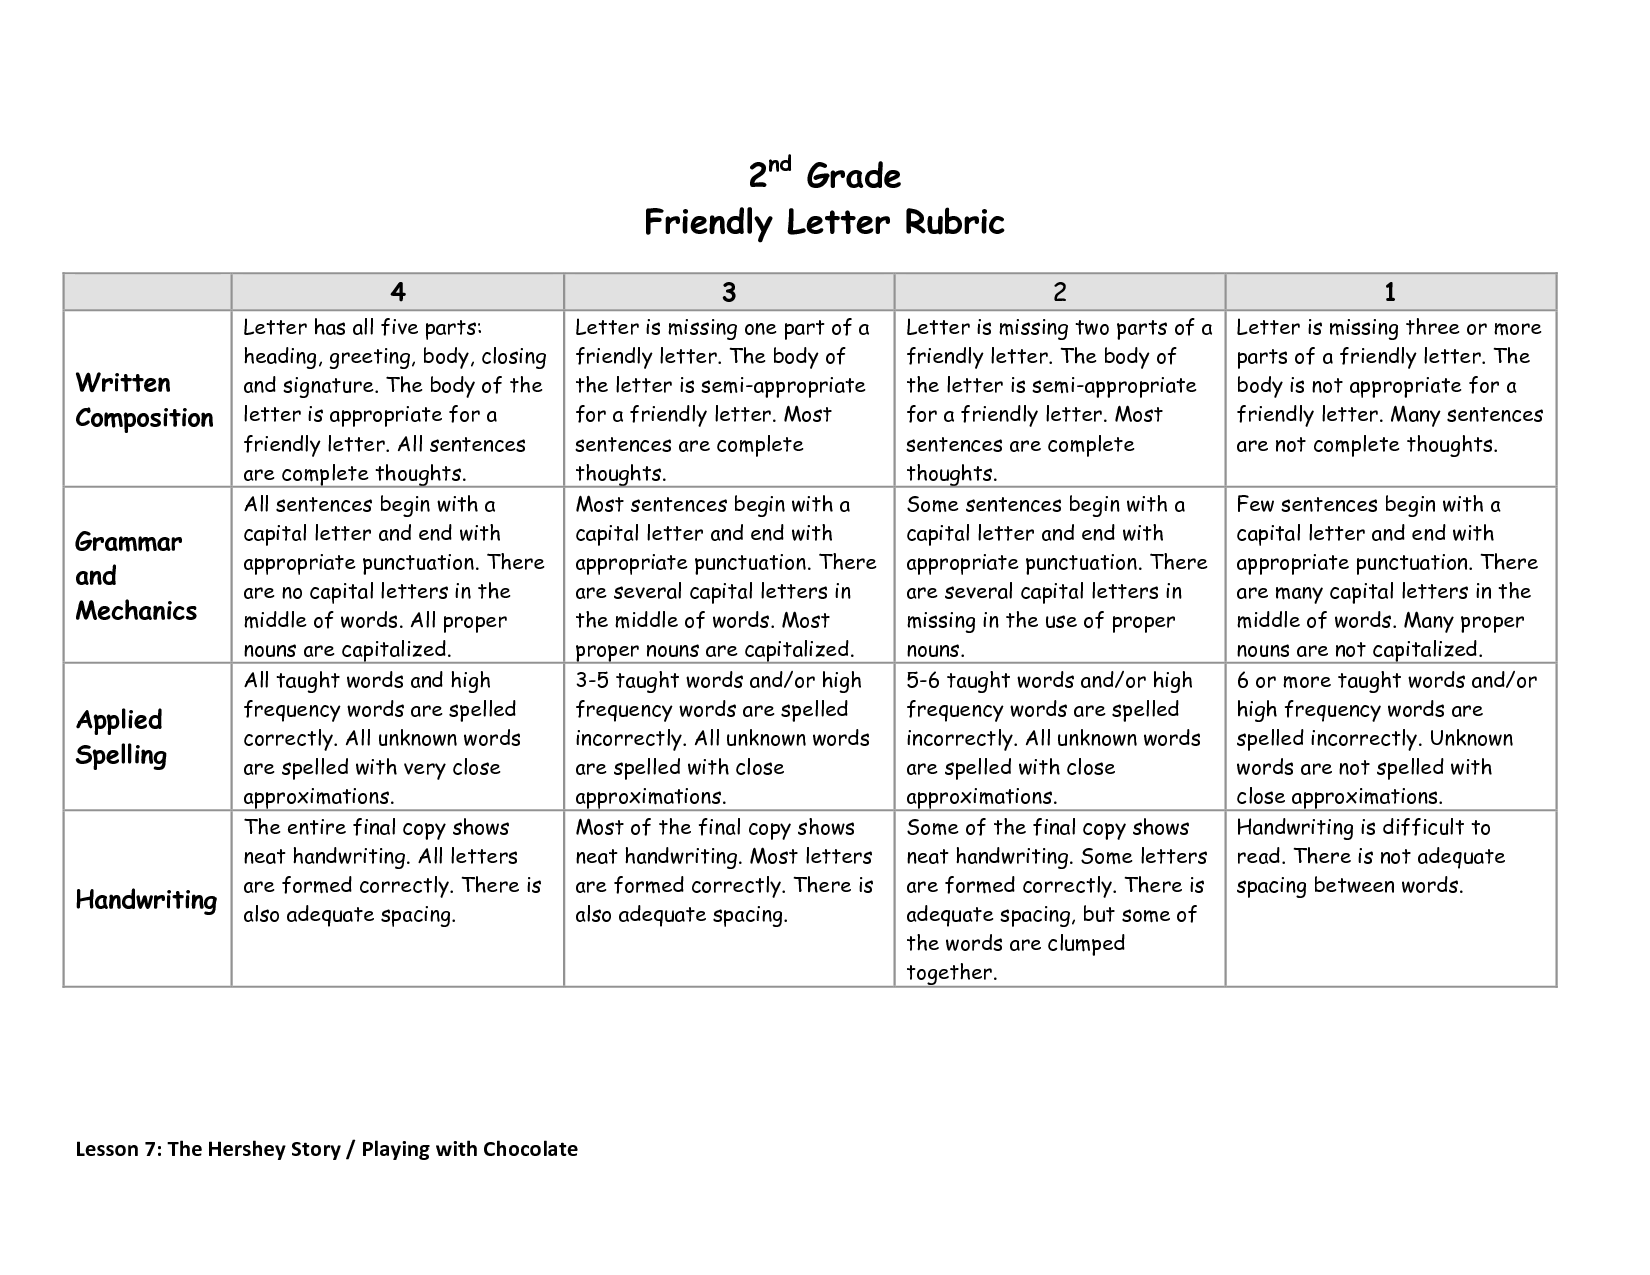 Friendly Letter Rubric 2nd Grade Image